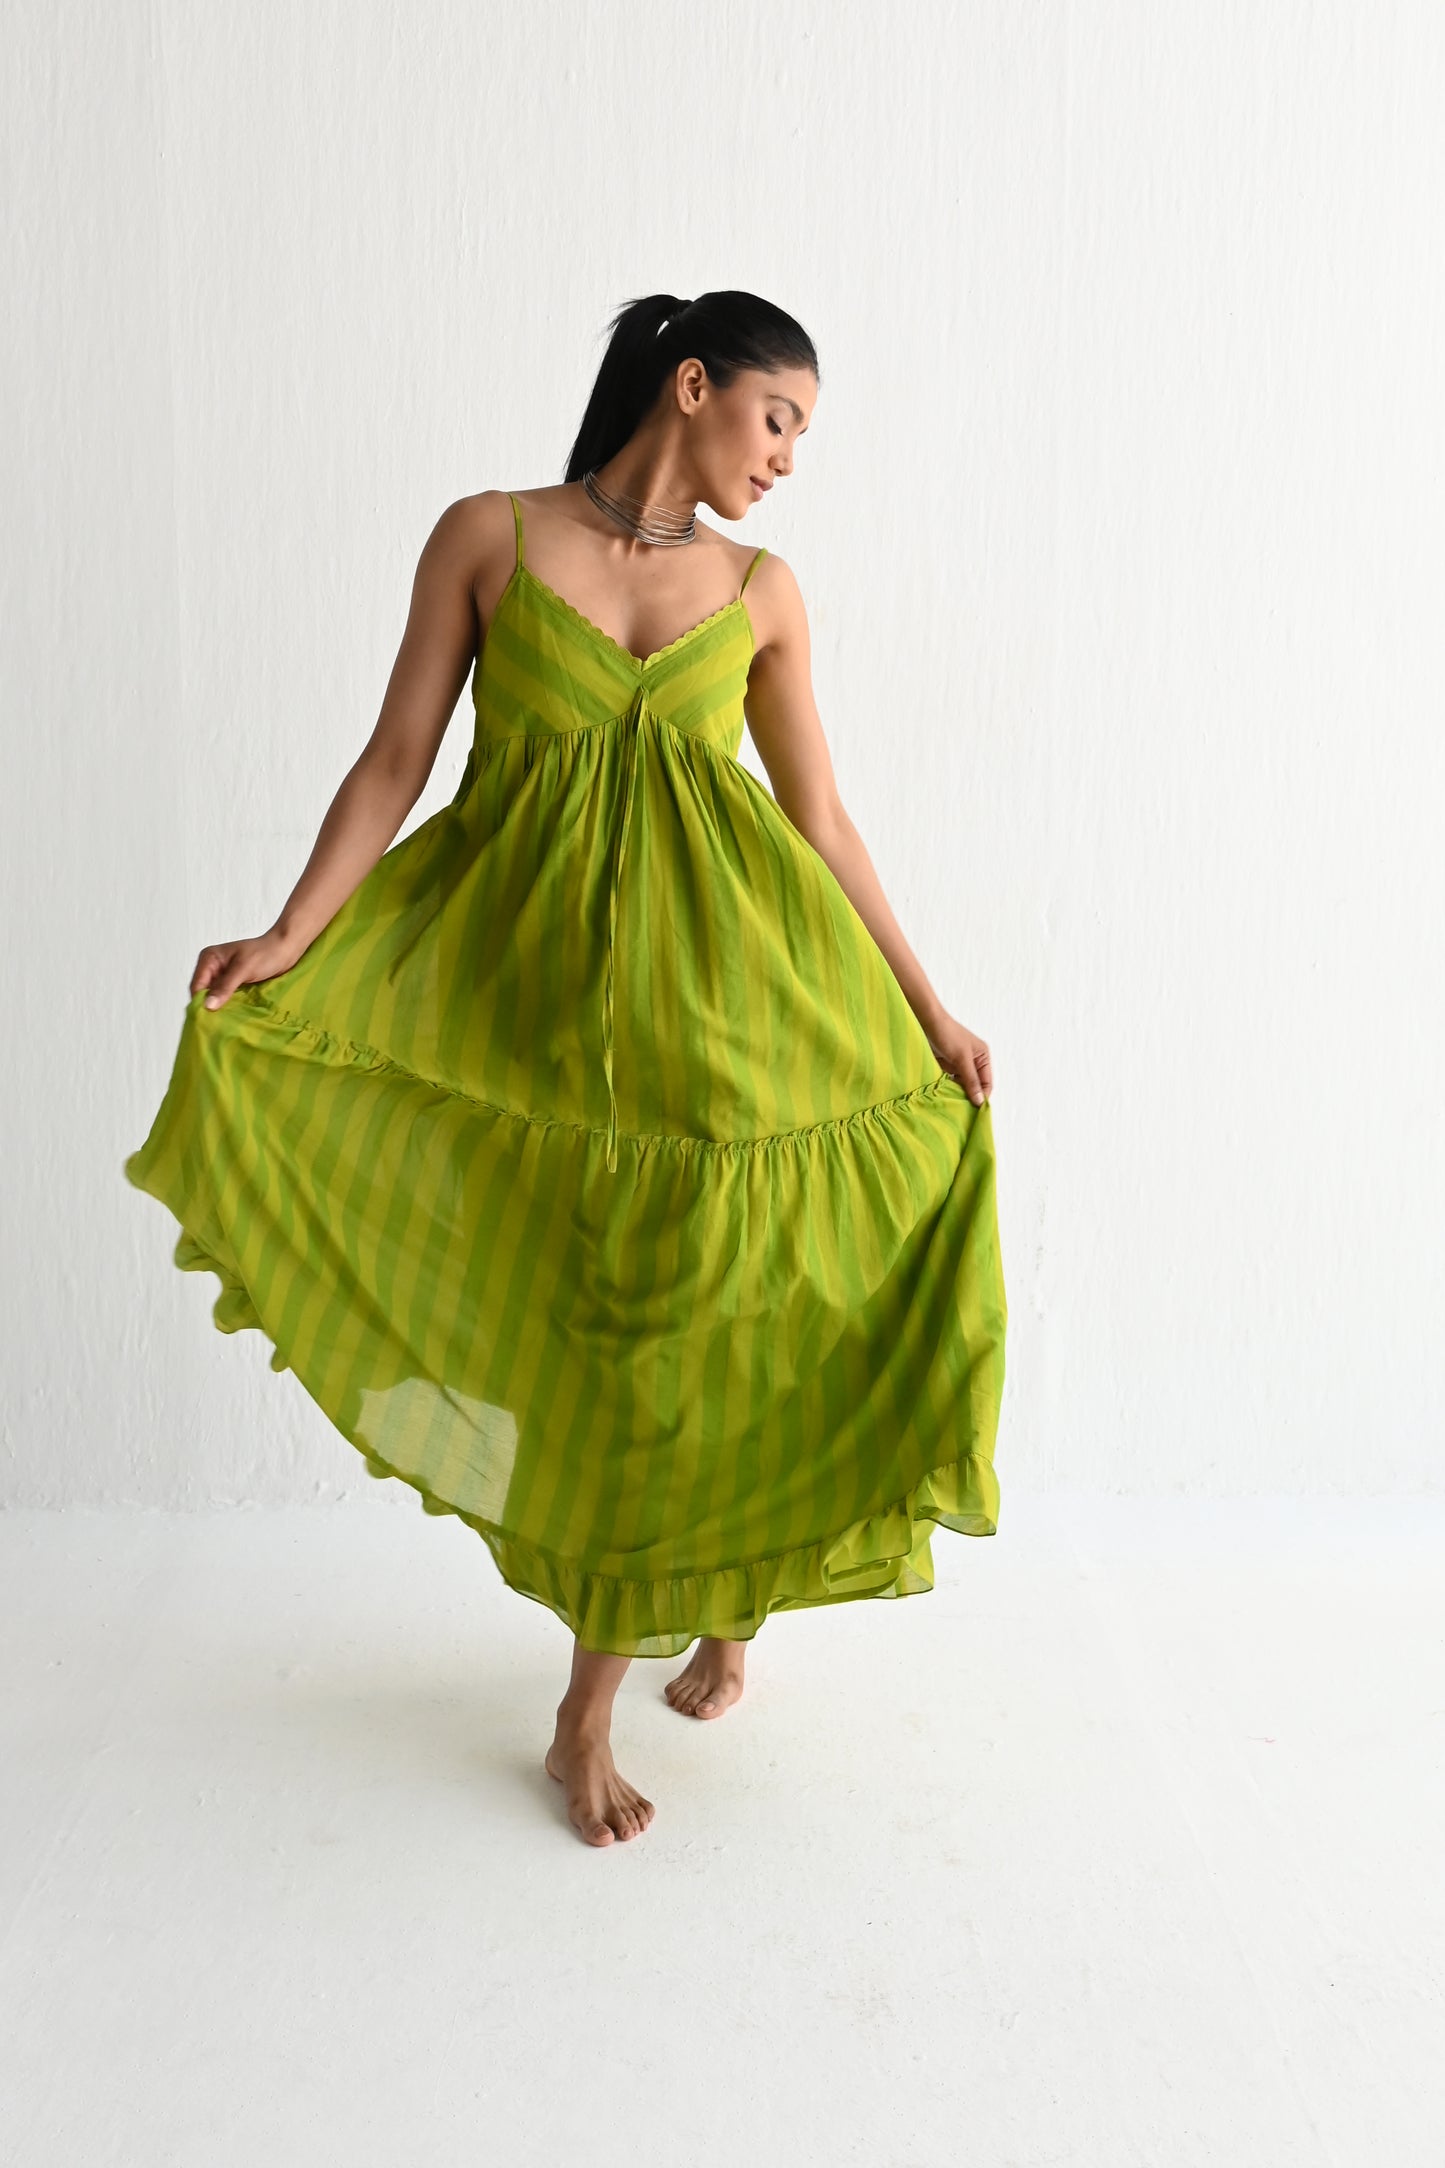 Bavs Maxi in Lime Green Stripes